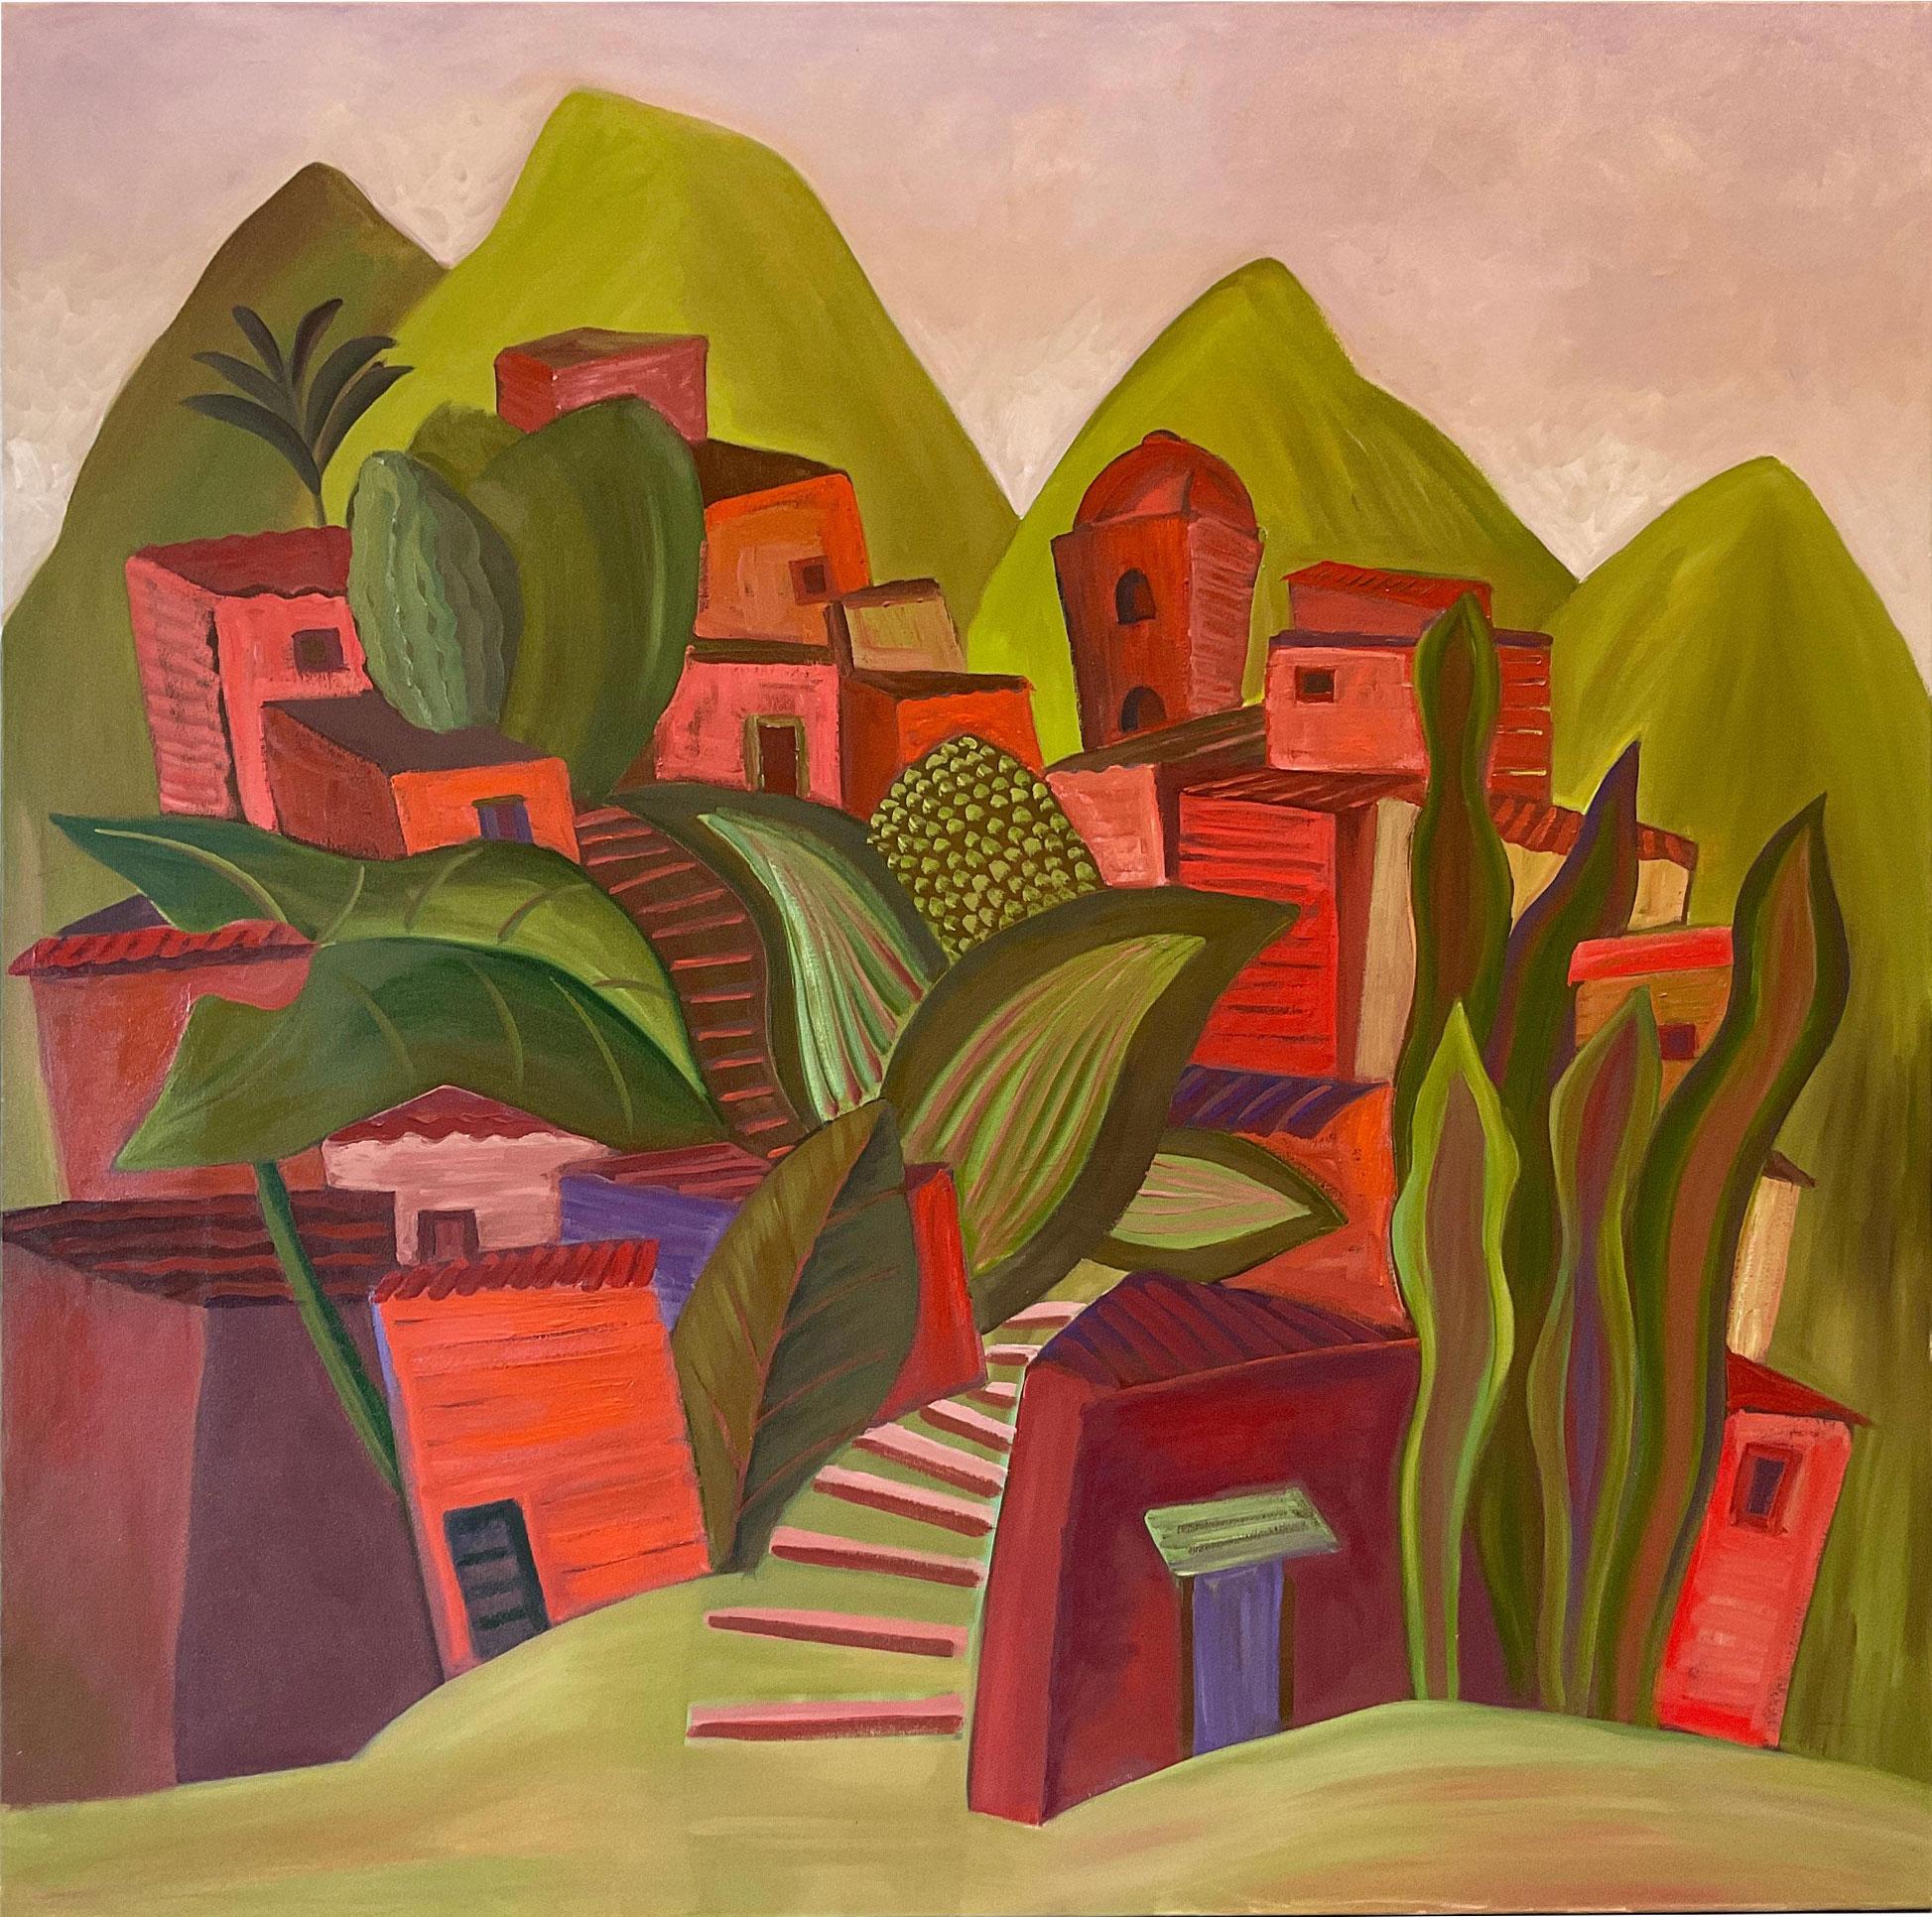 A coral village nestled into a verdant hill with exaggerated leaves/ trees

Coral Village - Figurative Painting - American Modern Art By Marc Zimmerman

This masterpiece is exhibited in the Zimmerman Gallery, Carmel CA.


Marc Zimmerman creates